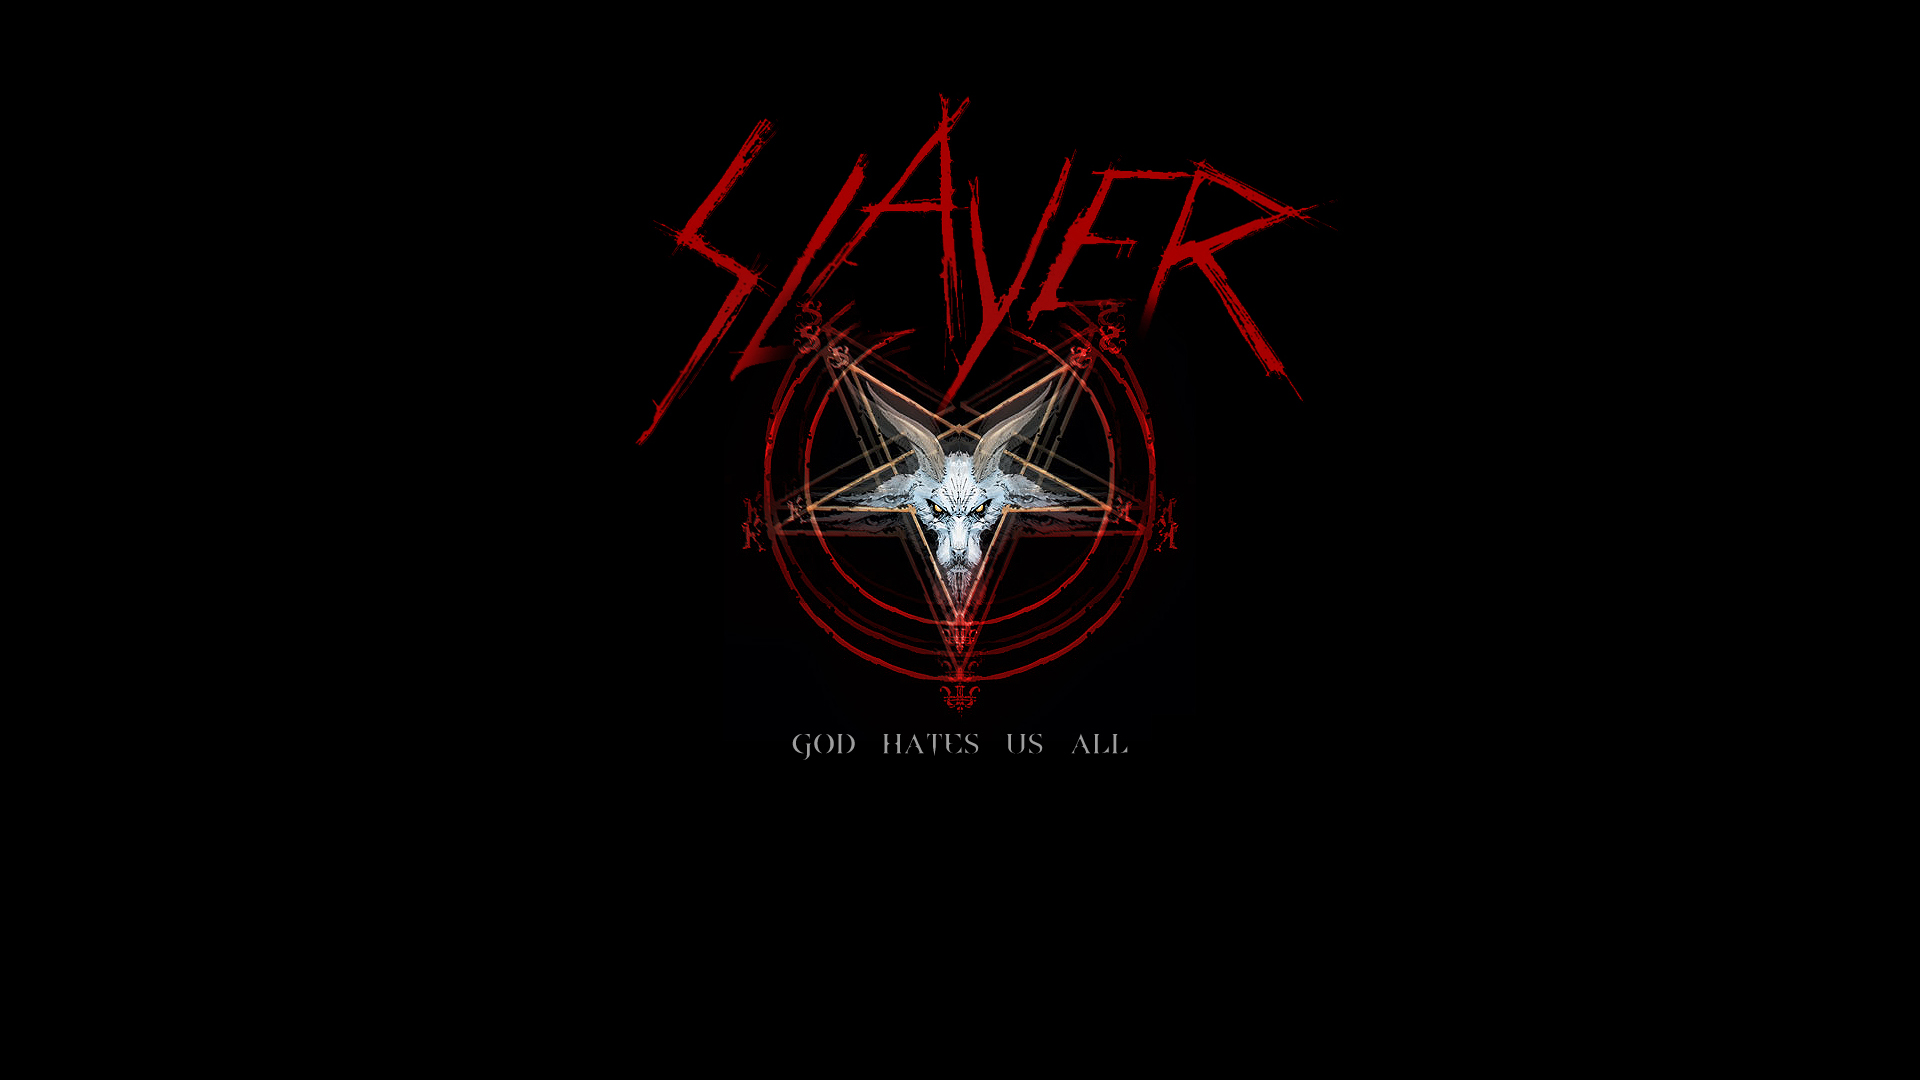 Slayer Wallpaper Music And